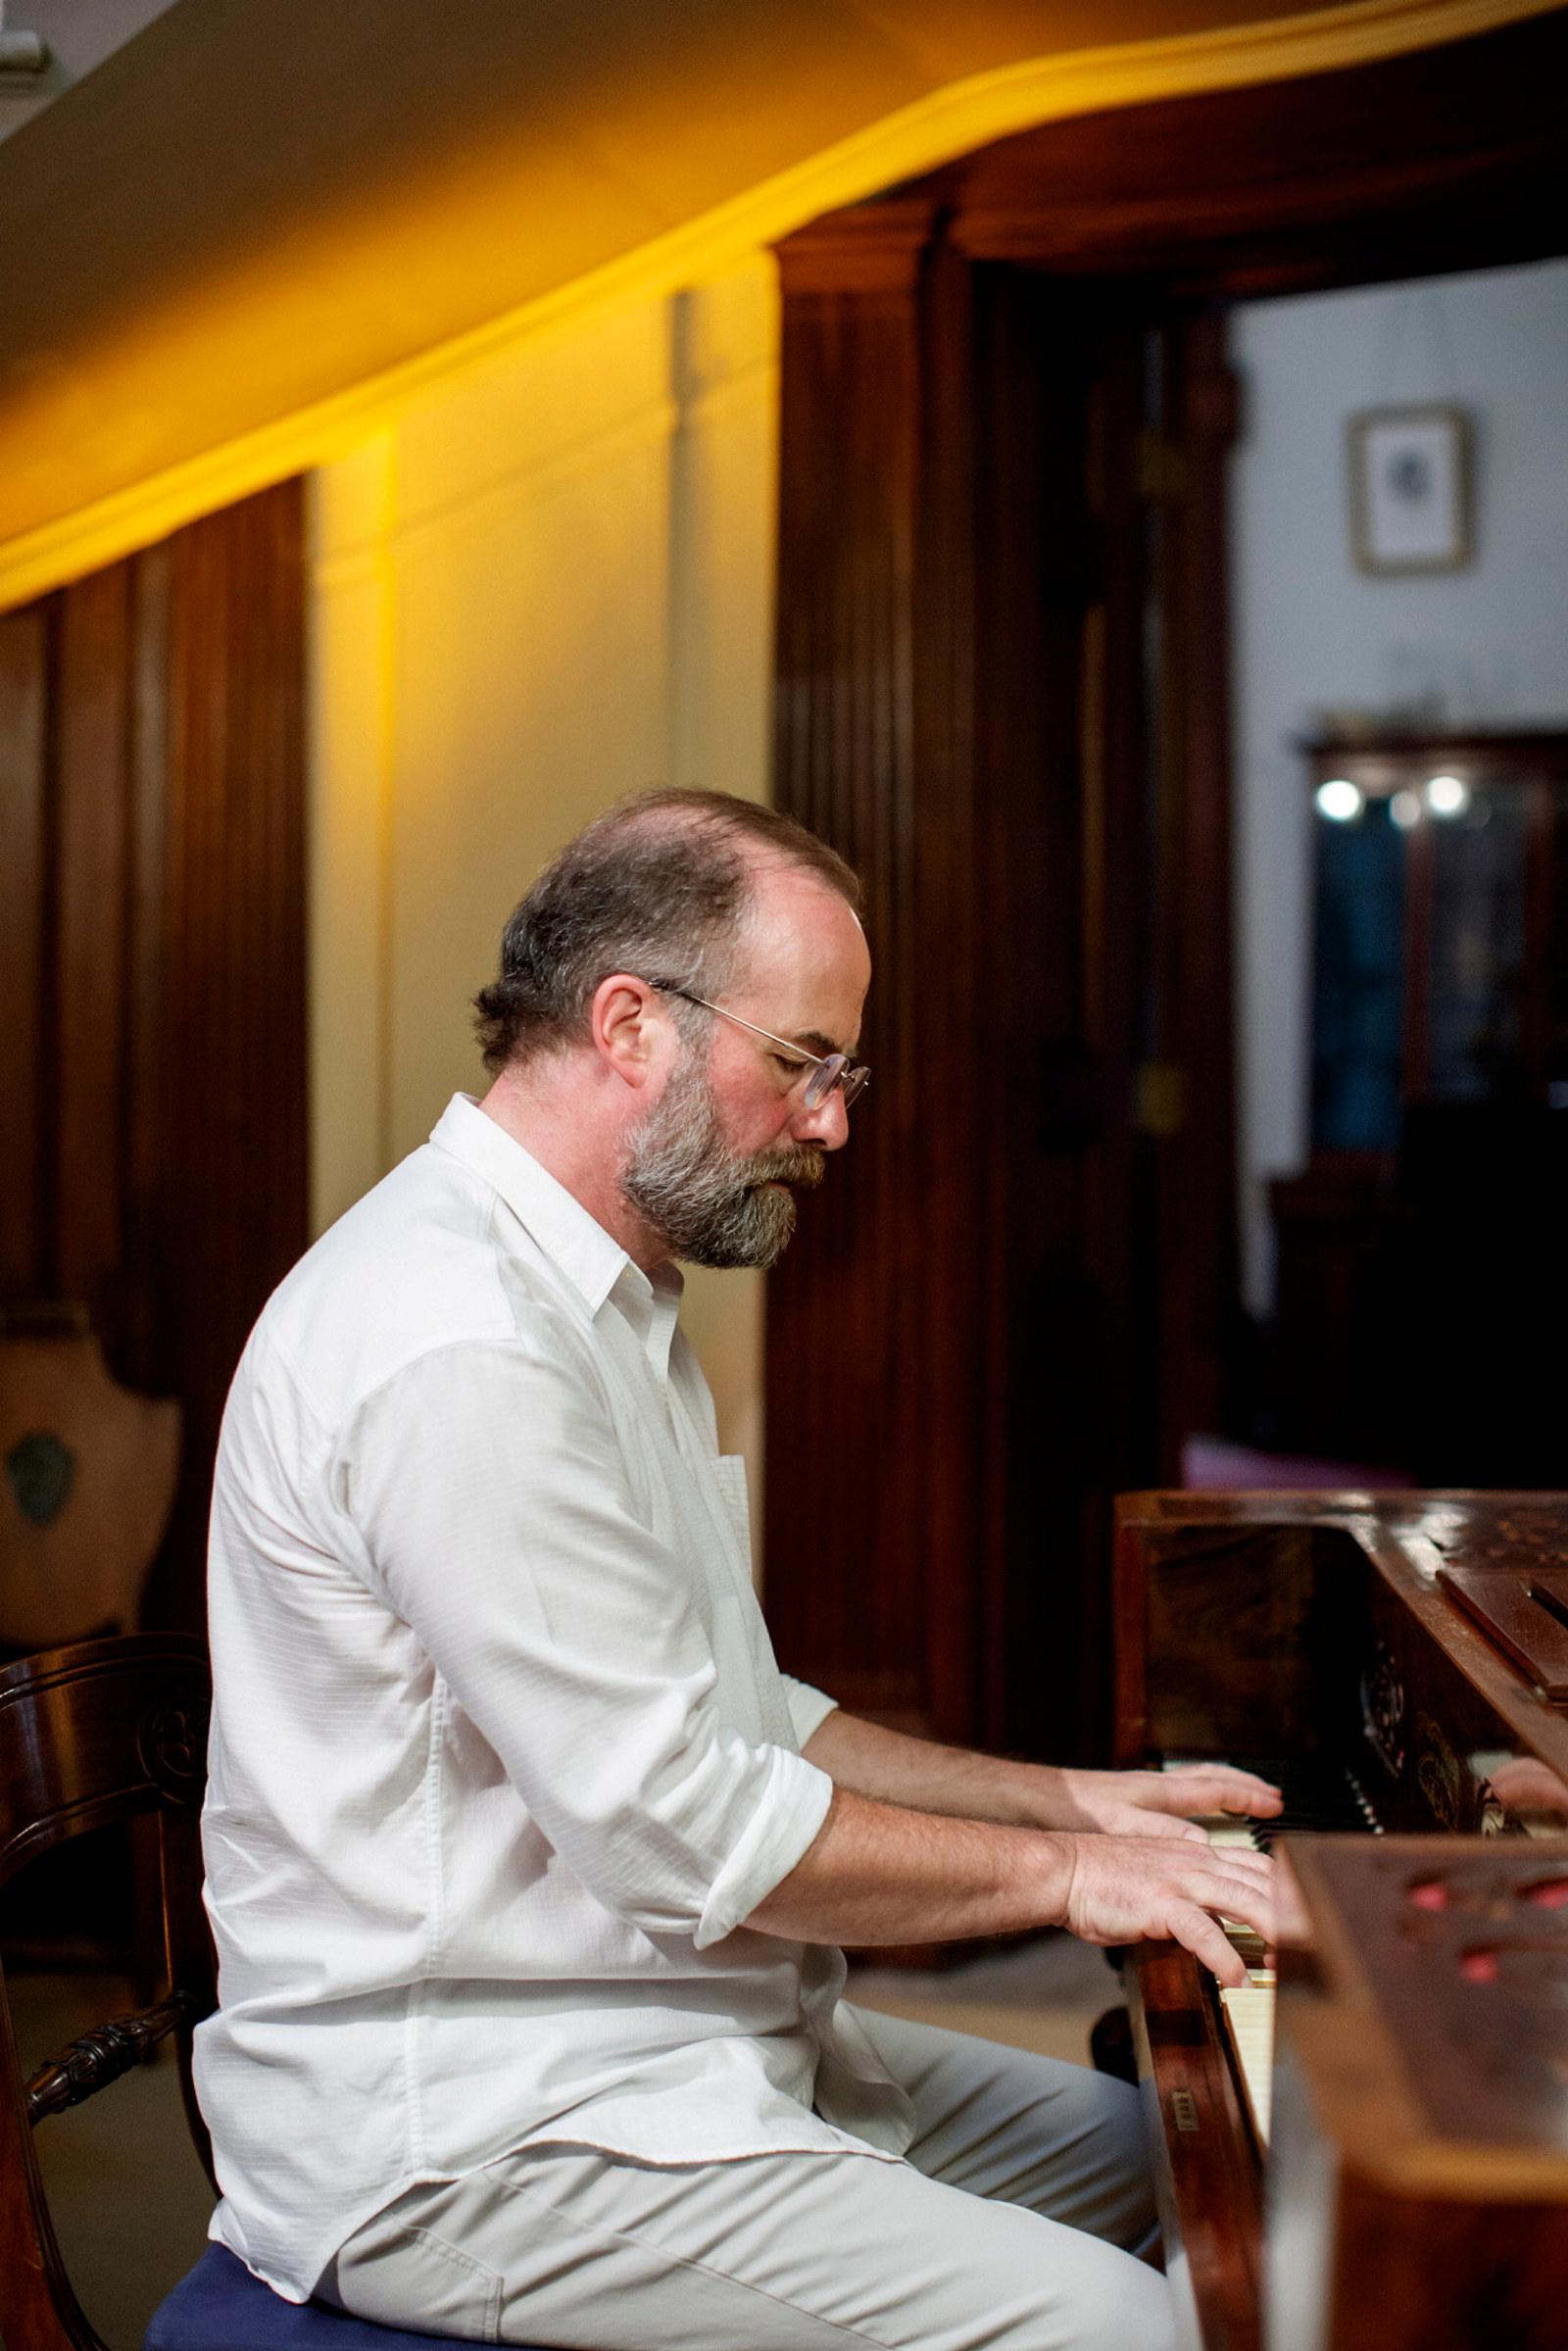 Ian Blake, composer and performer, playing piano in the saloon at Elizabeth Bay House